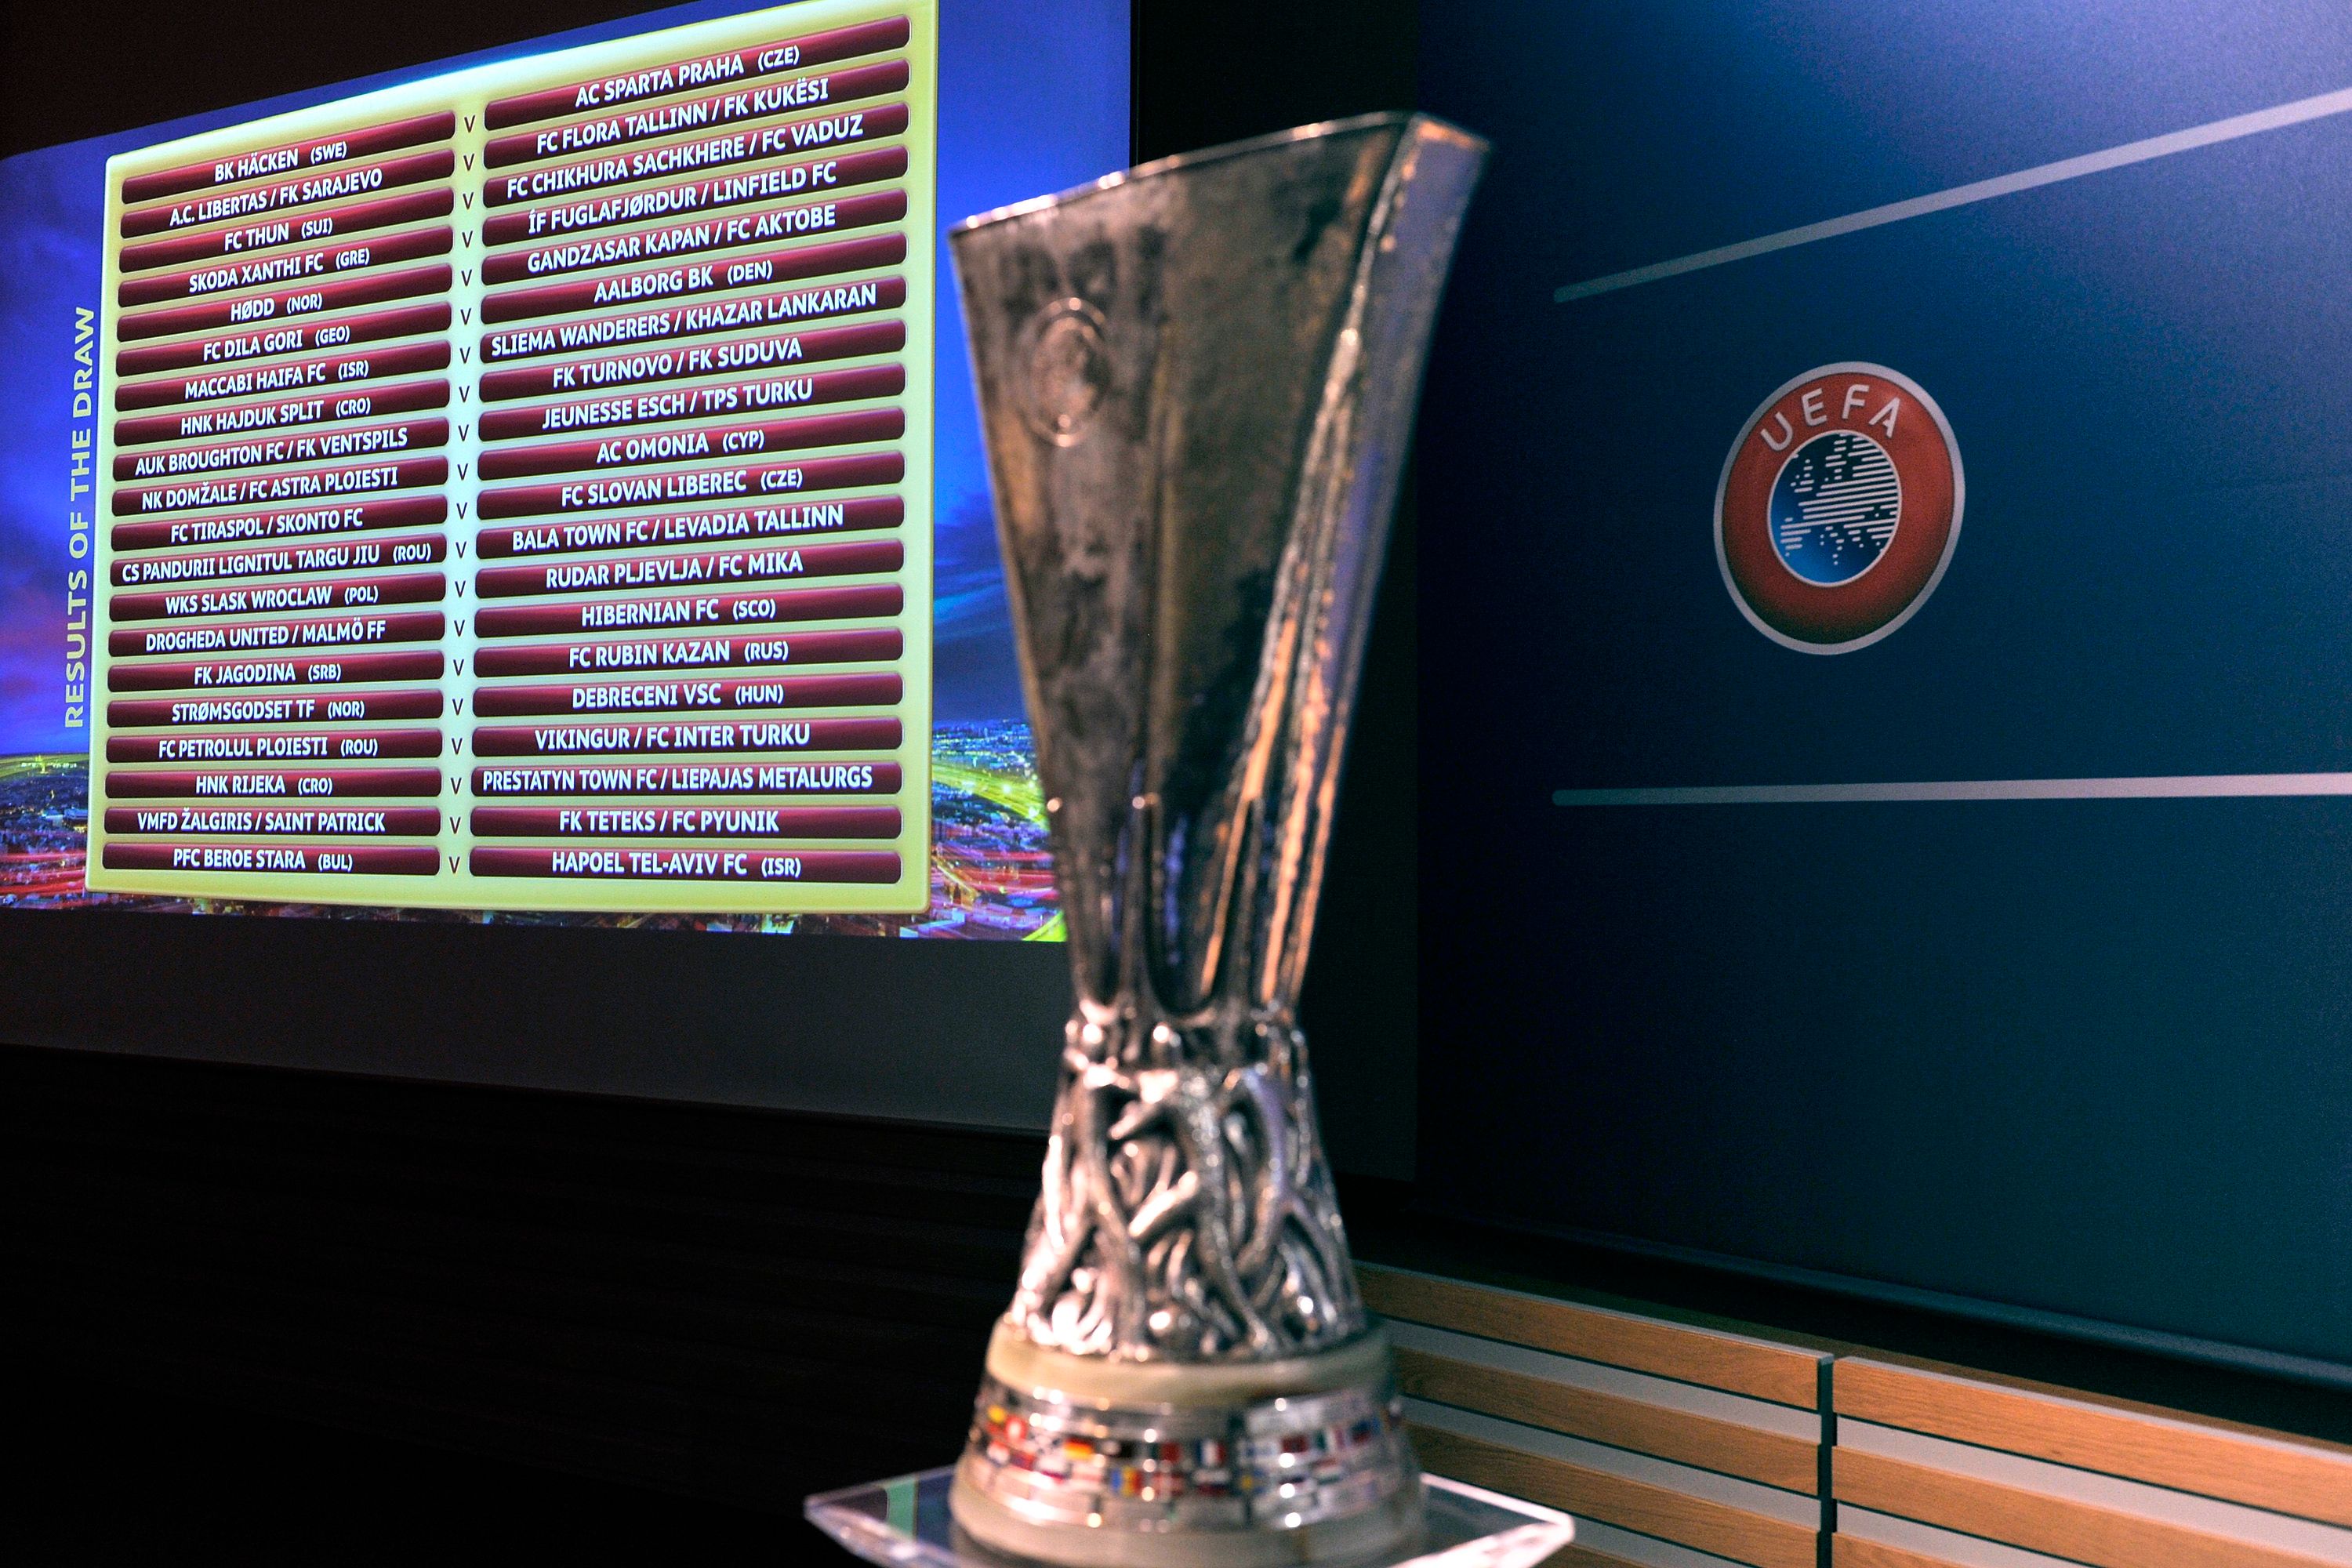 The UEFA Europa League qualifying round draw results are seen at the UEFA headquarters